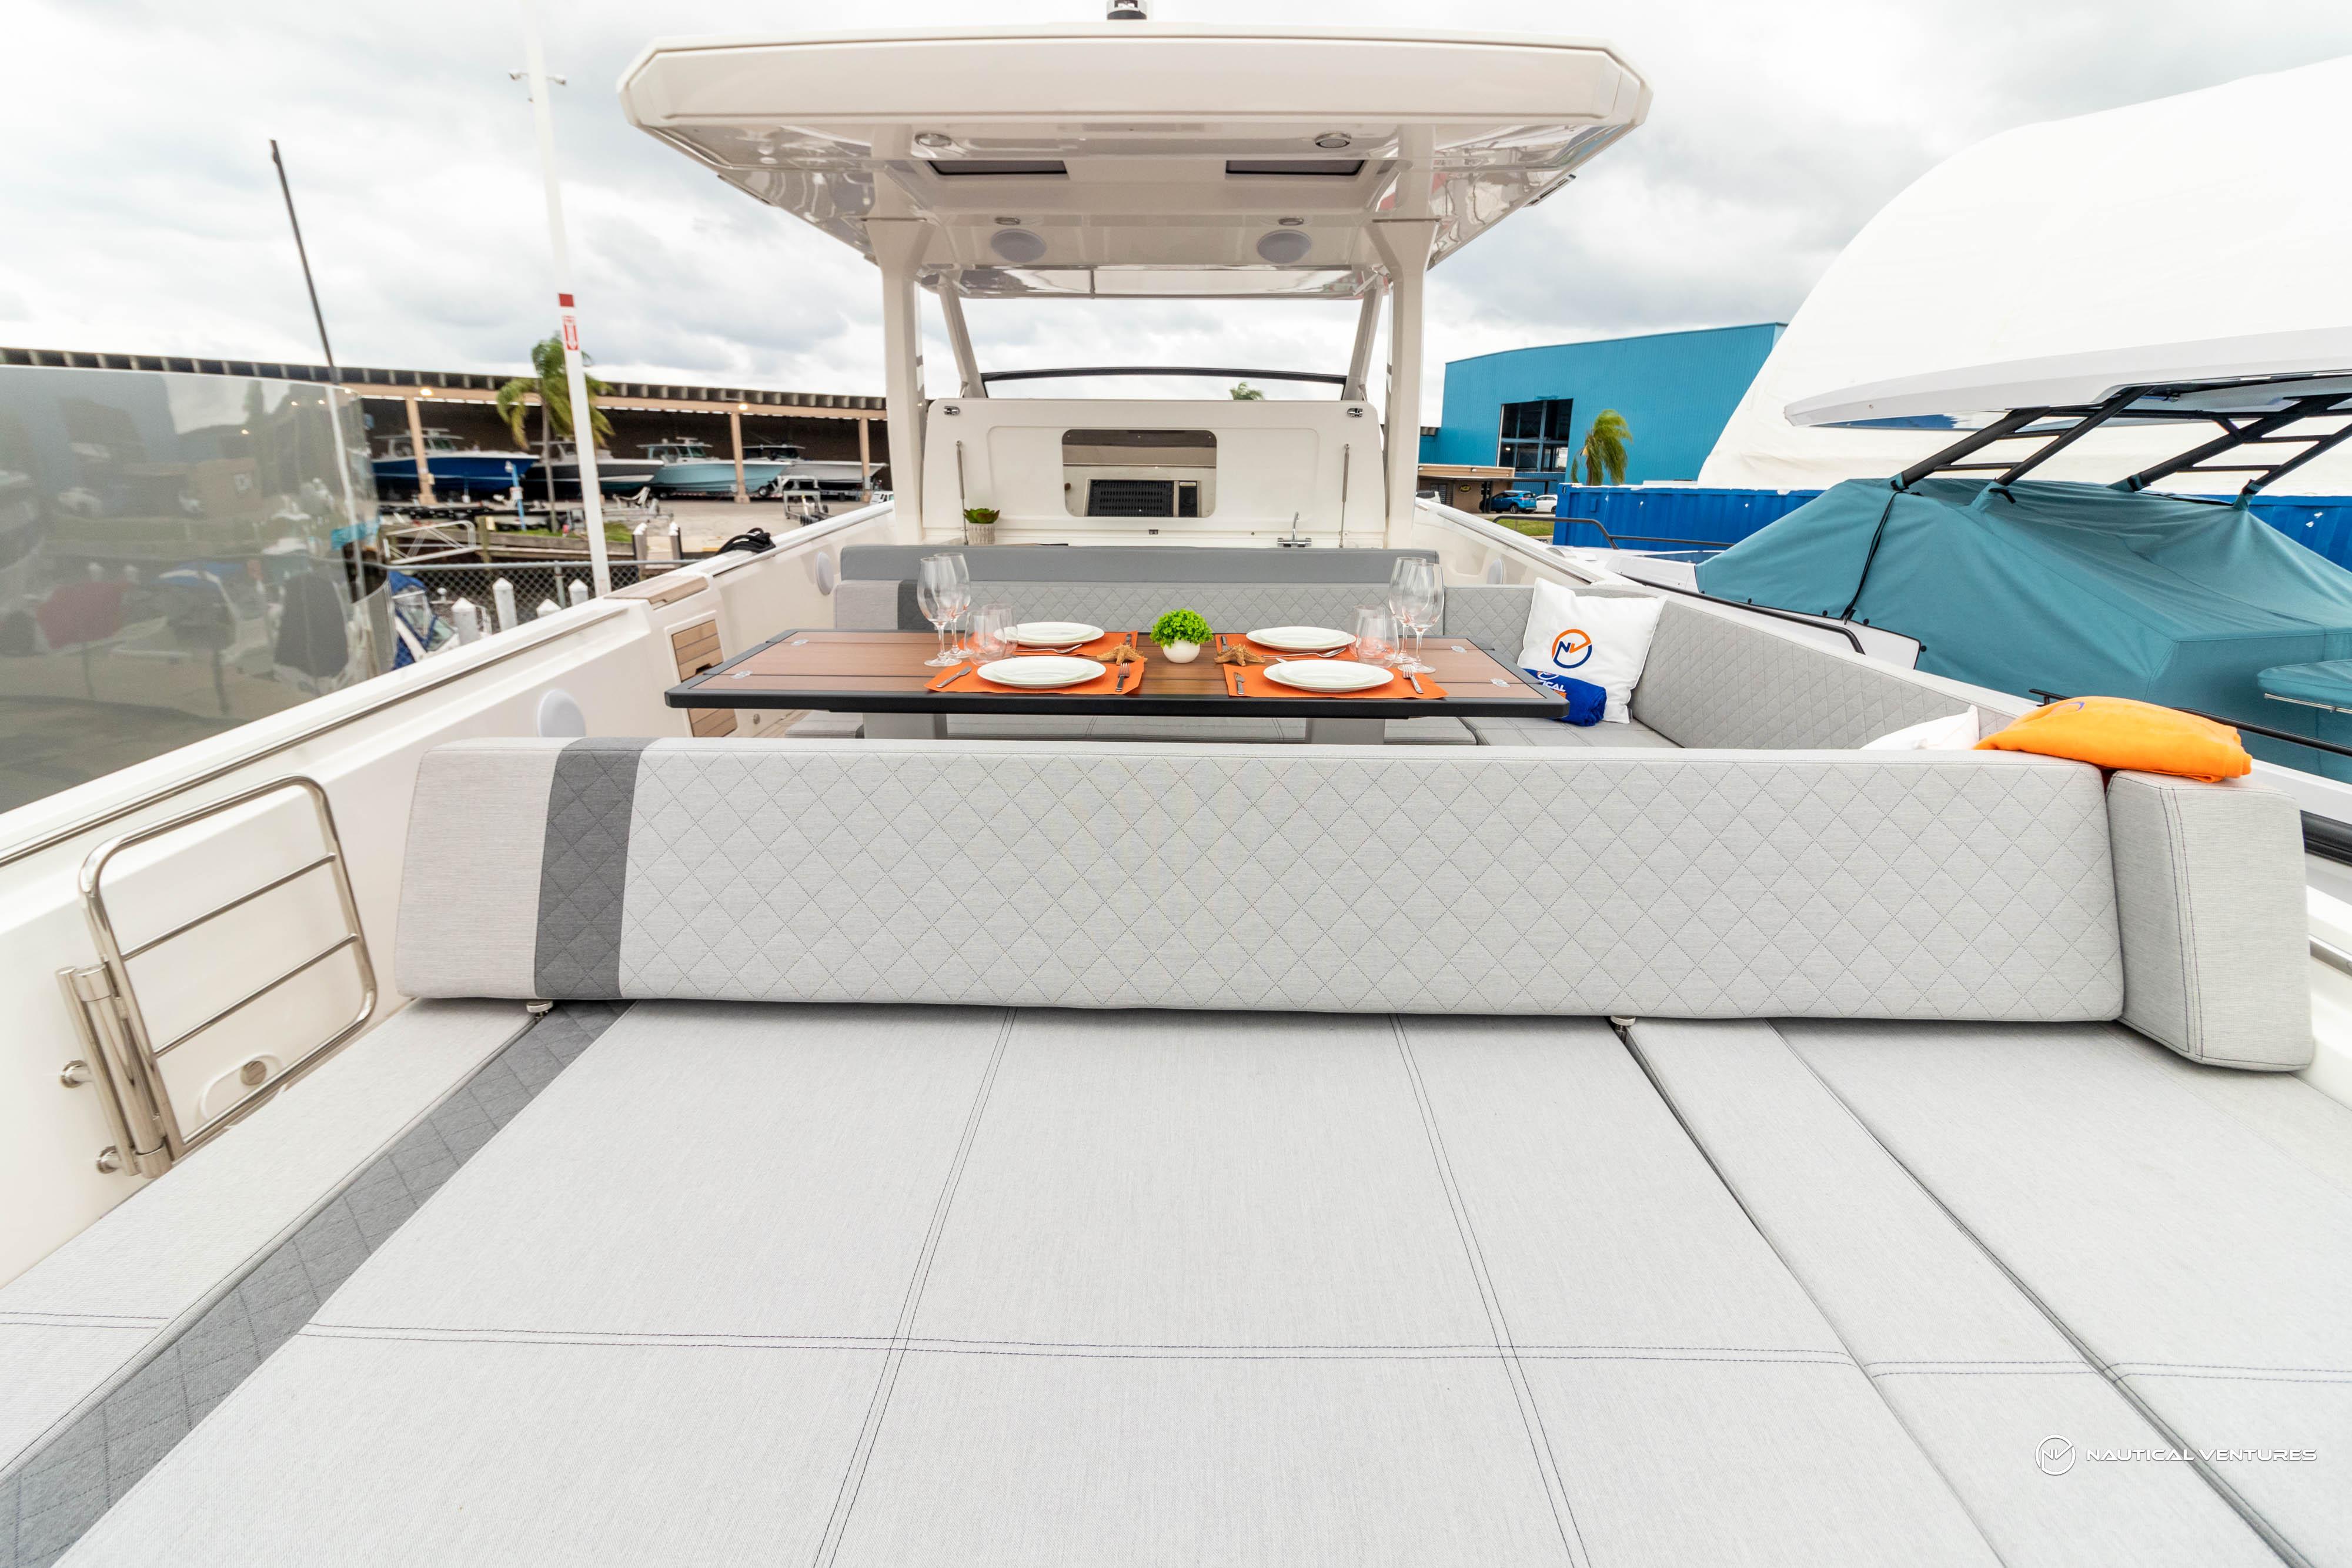 New 2022 Windy SR44 SX, 33316 Fort Lauderdale - Boat Trader